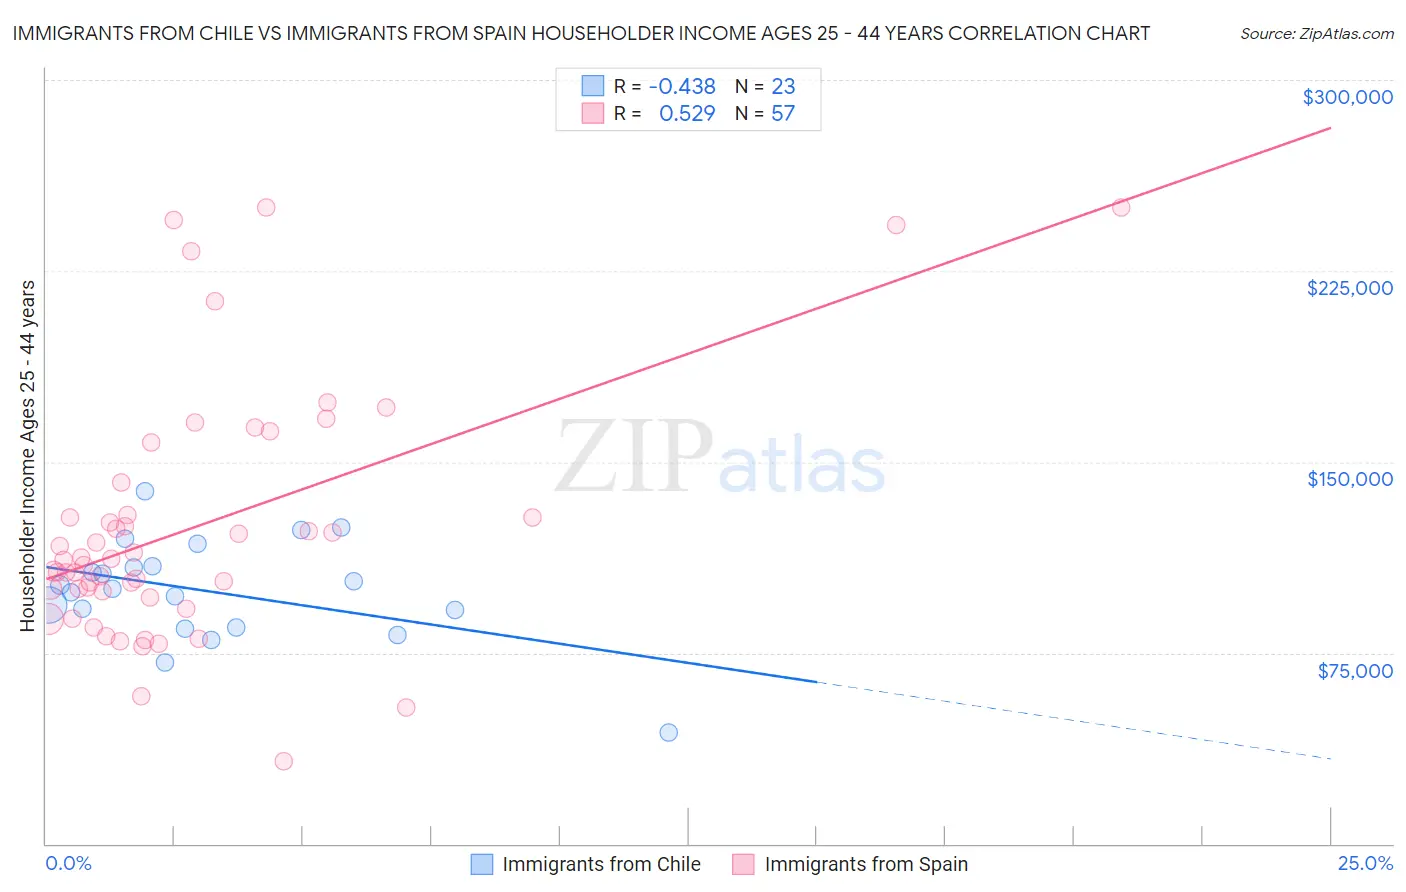 Immigrants from Chile vs Immigrants from Spain Householder Income Ages 25 - 44 years